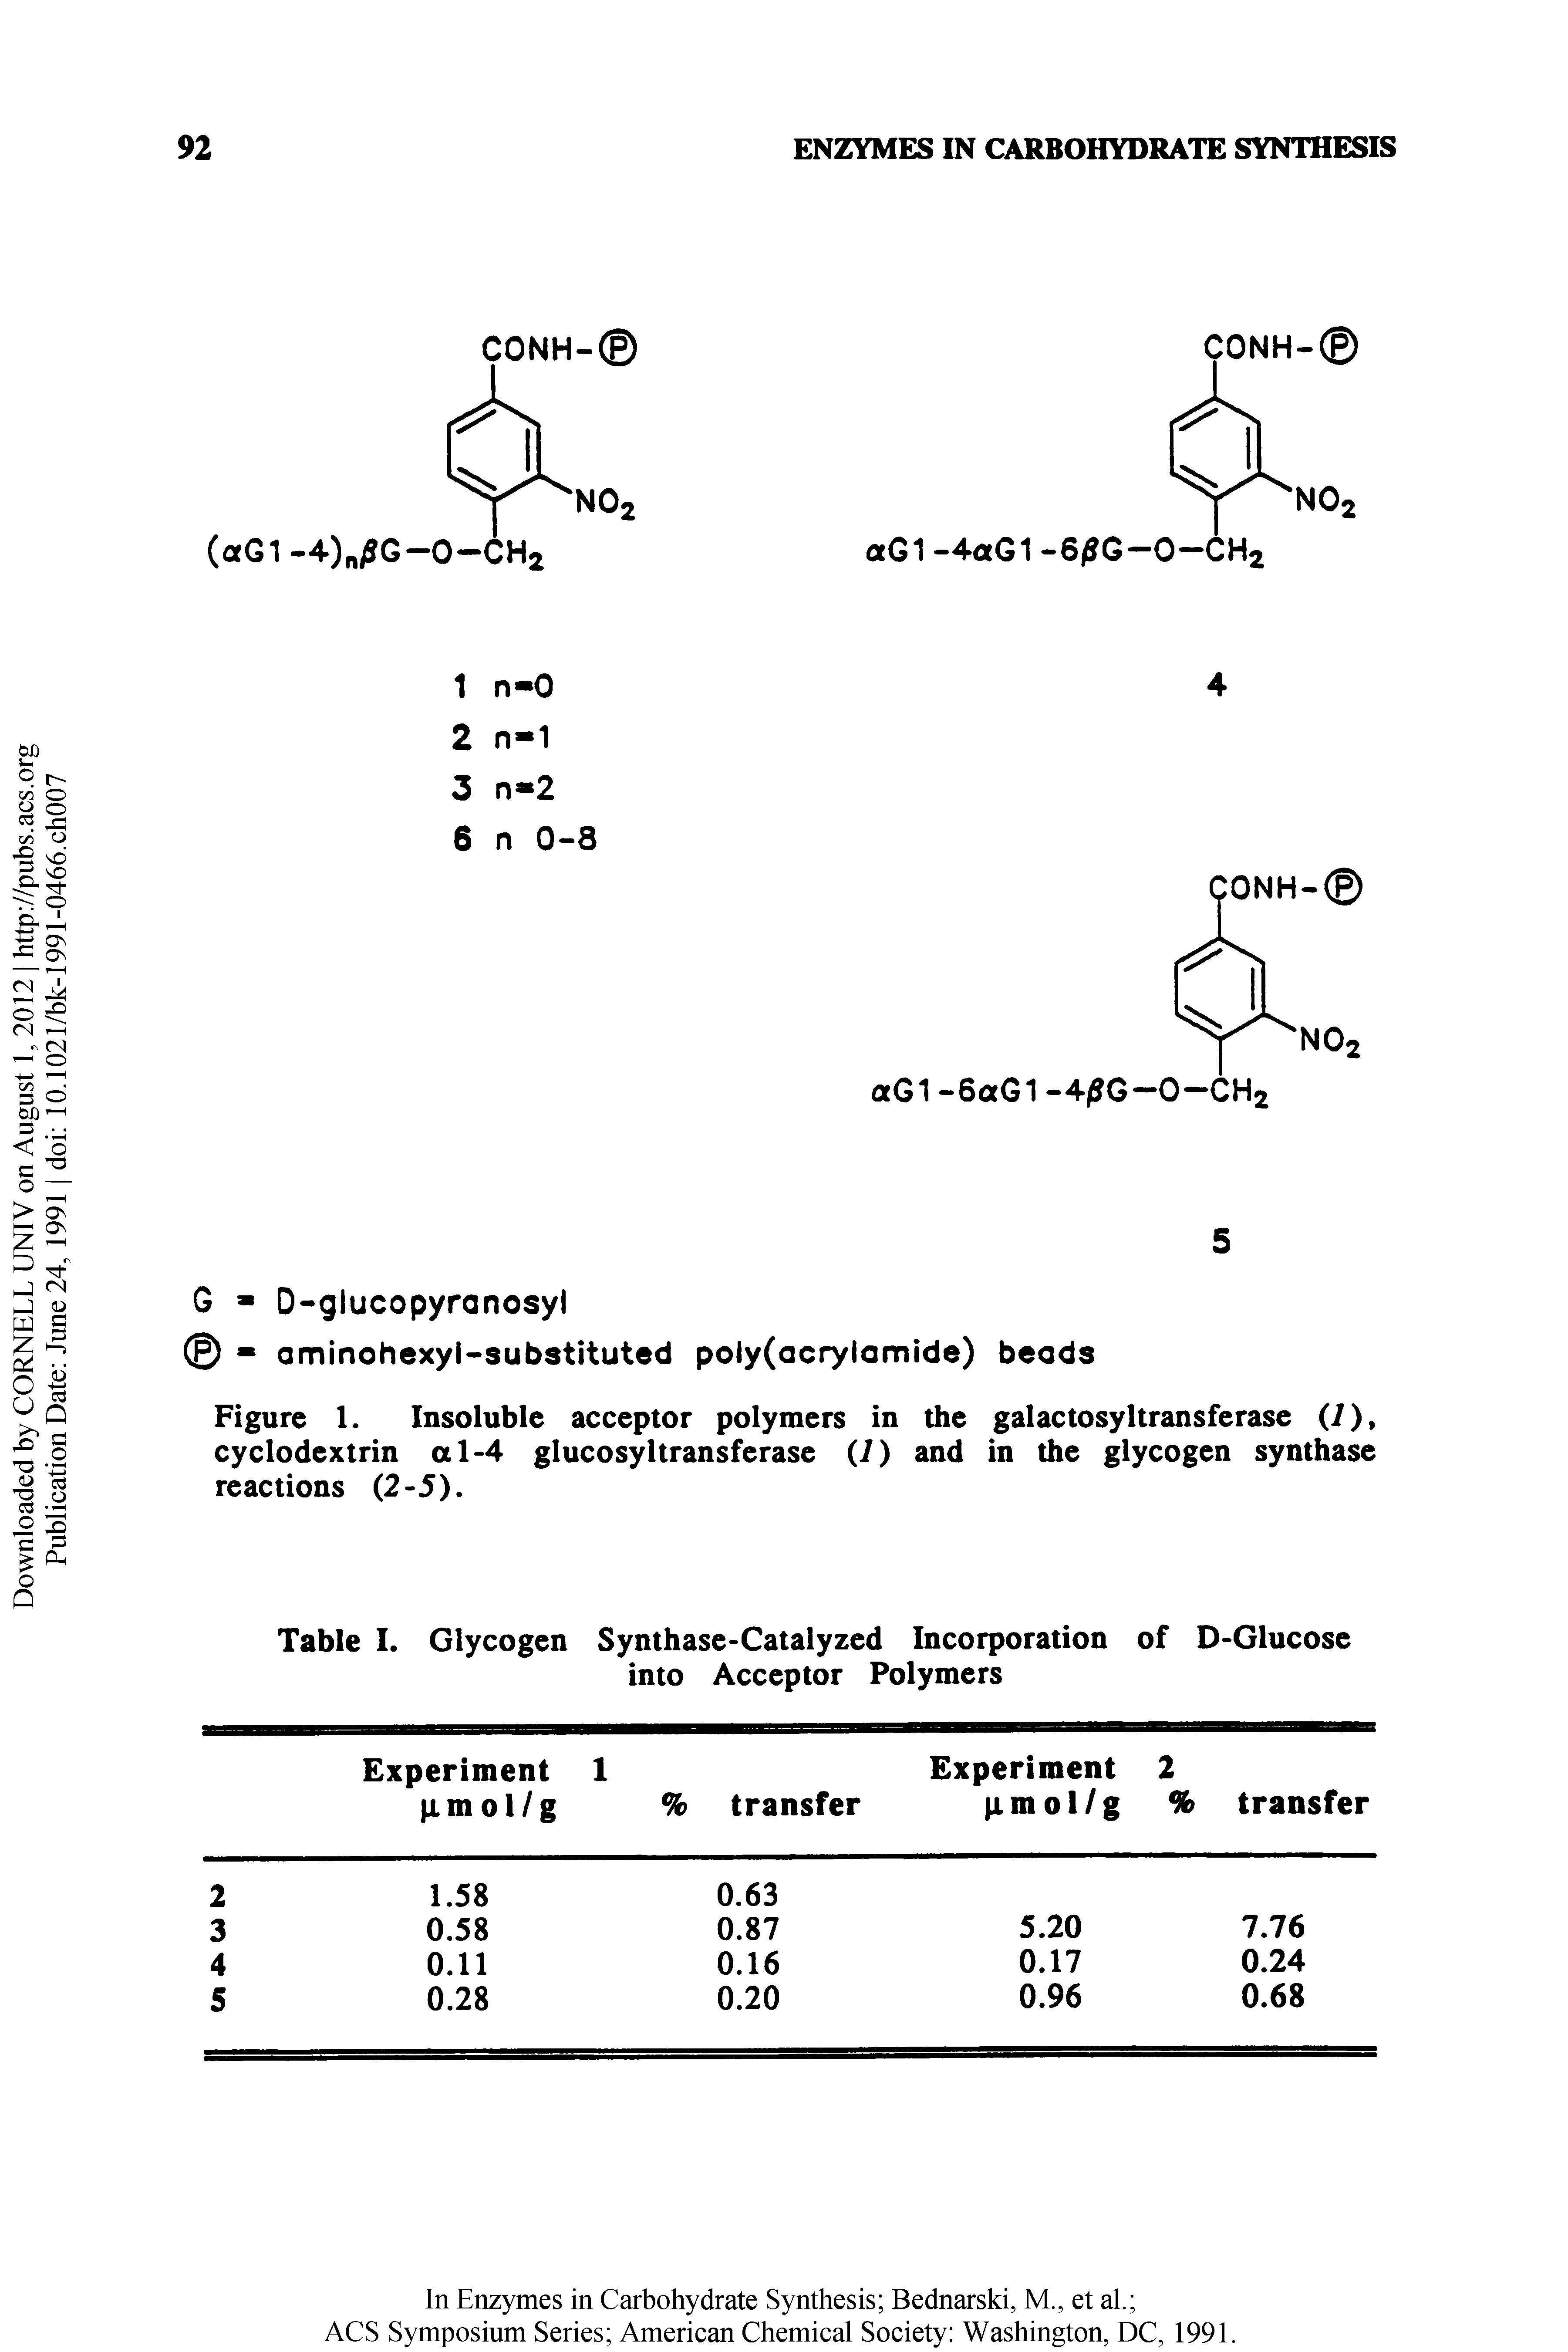 Figure 1. Insoluble acceptor polymers in the galactosyltransferase (7), cyclodextrin a 1-4 glucosyltransferase (7) and in the glycogen synthase reactions (2-5).